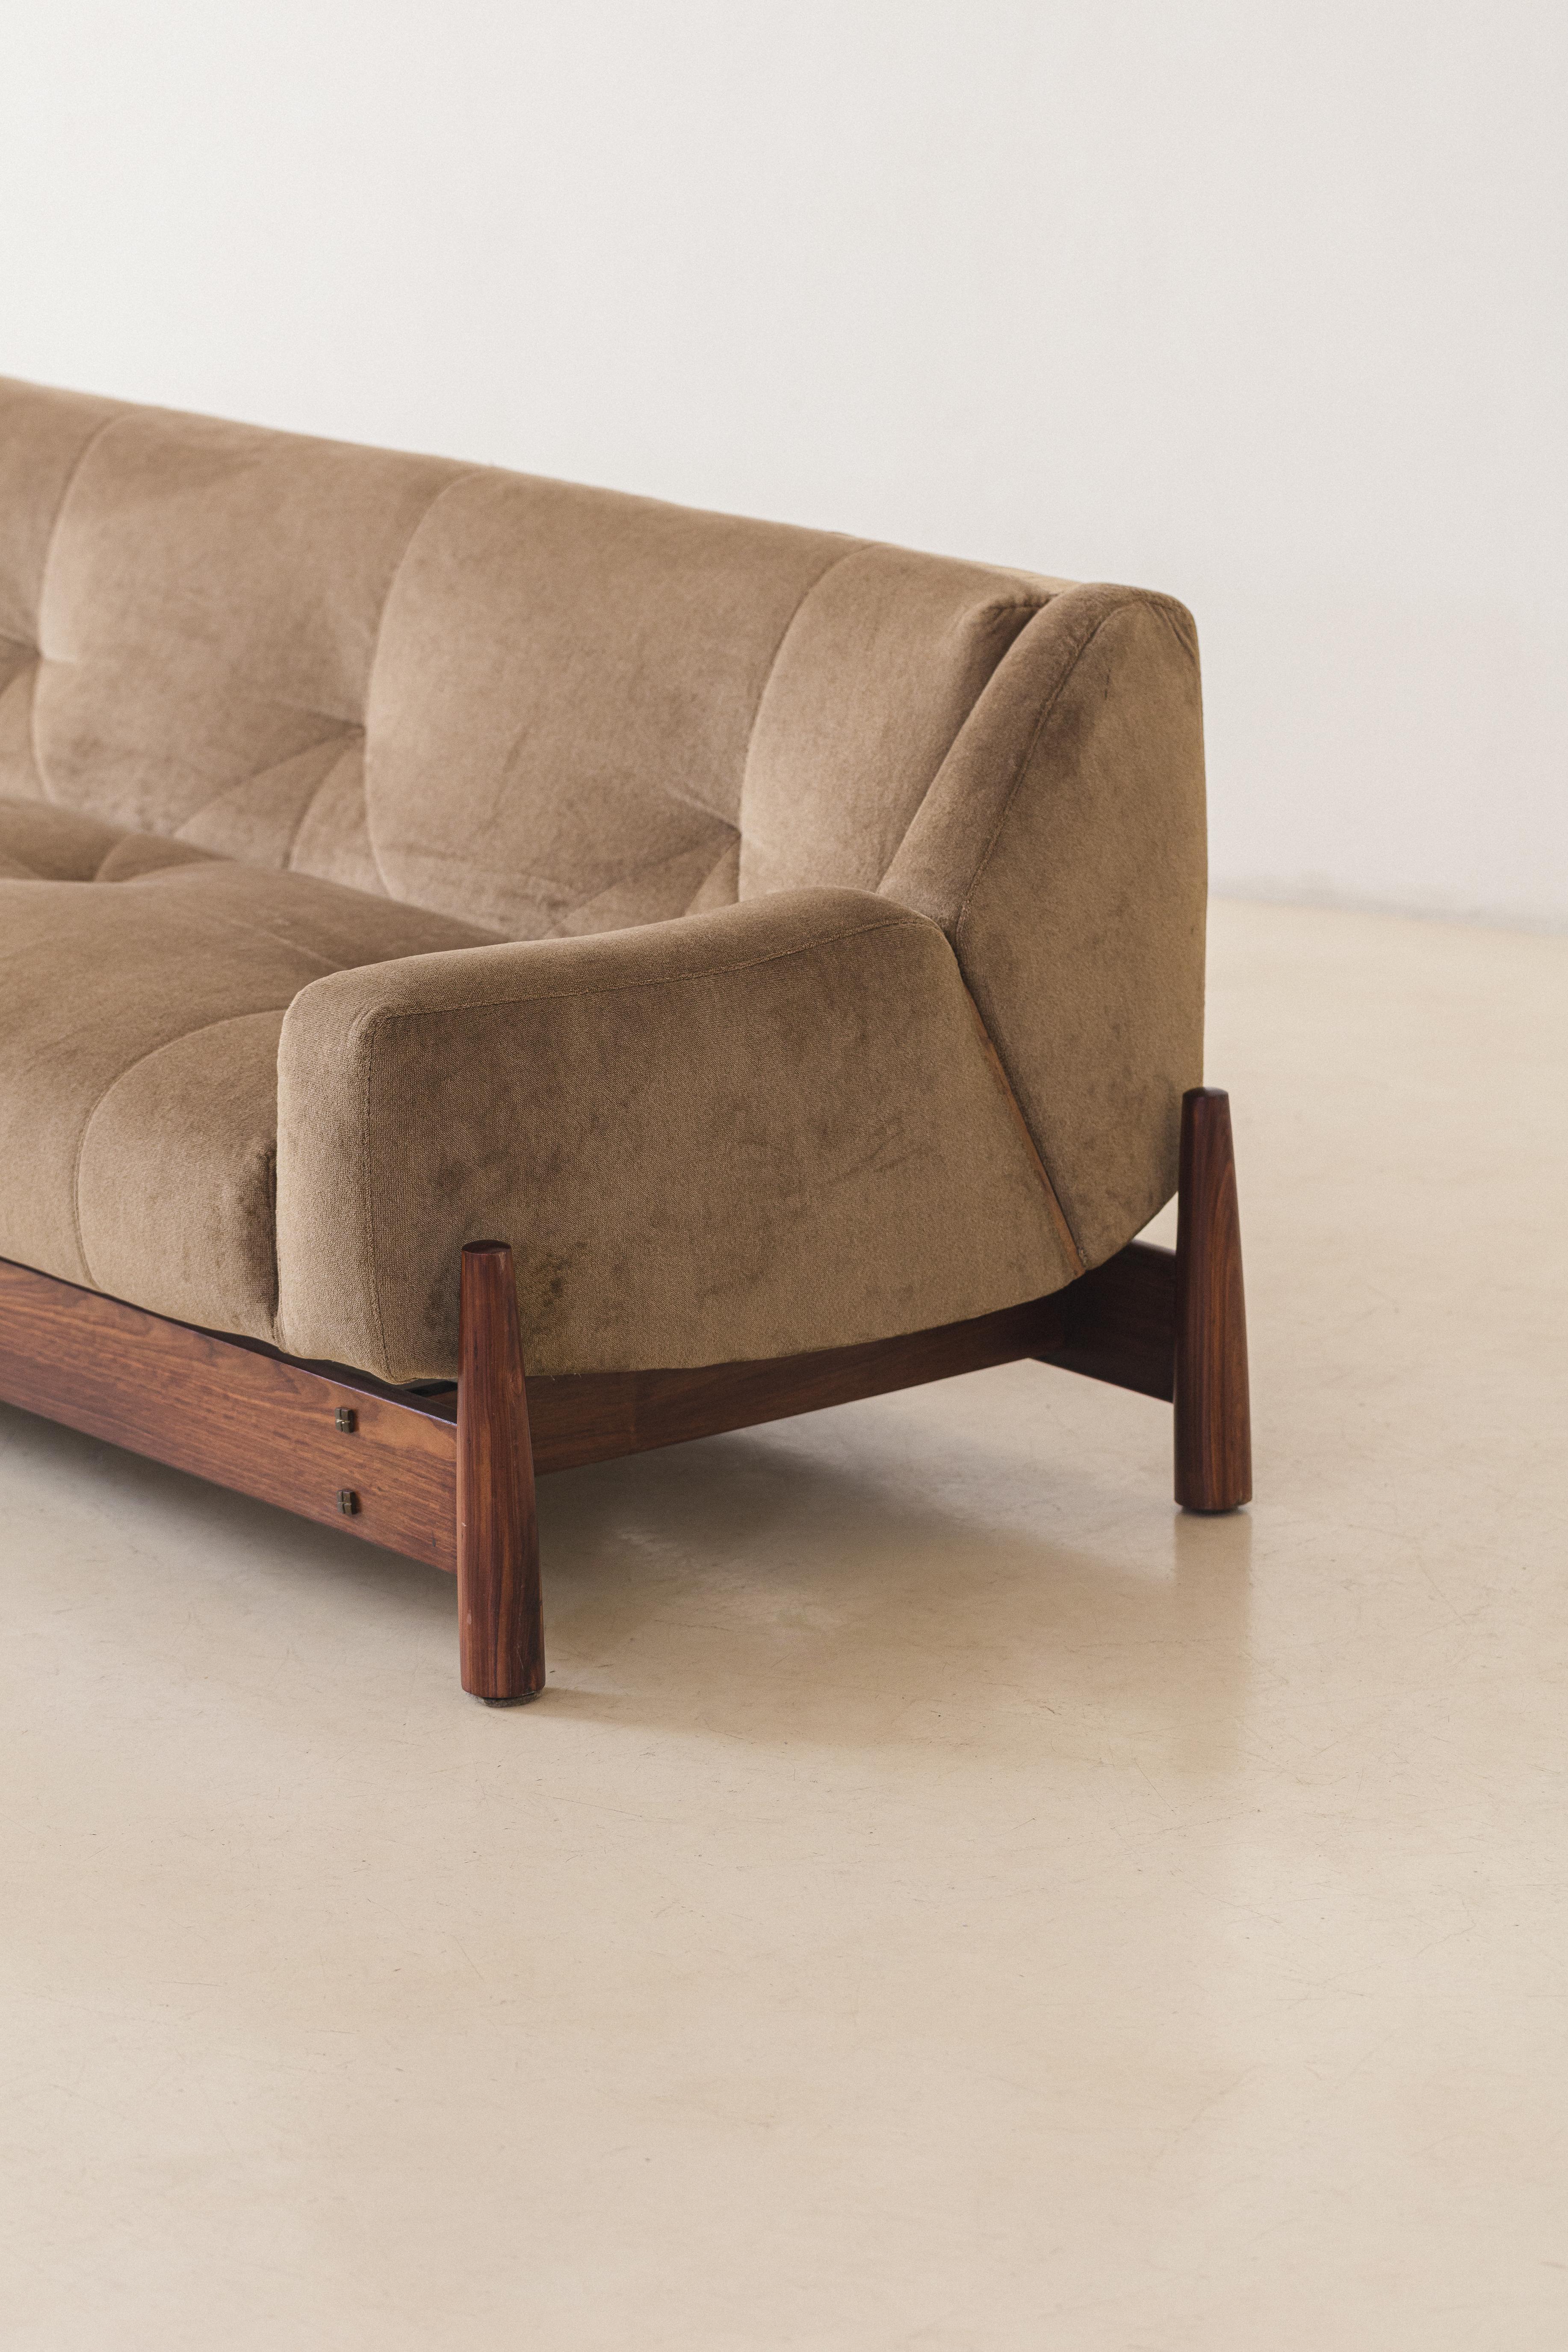 Imbuia wood Cimo Sofa Brazilian Design by Móveis Cimo, Mid-Century Modern, 1960s In Good Condition For Sale In New York, NY